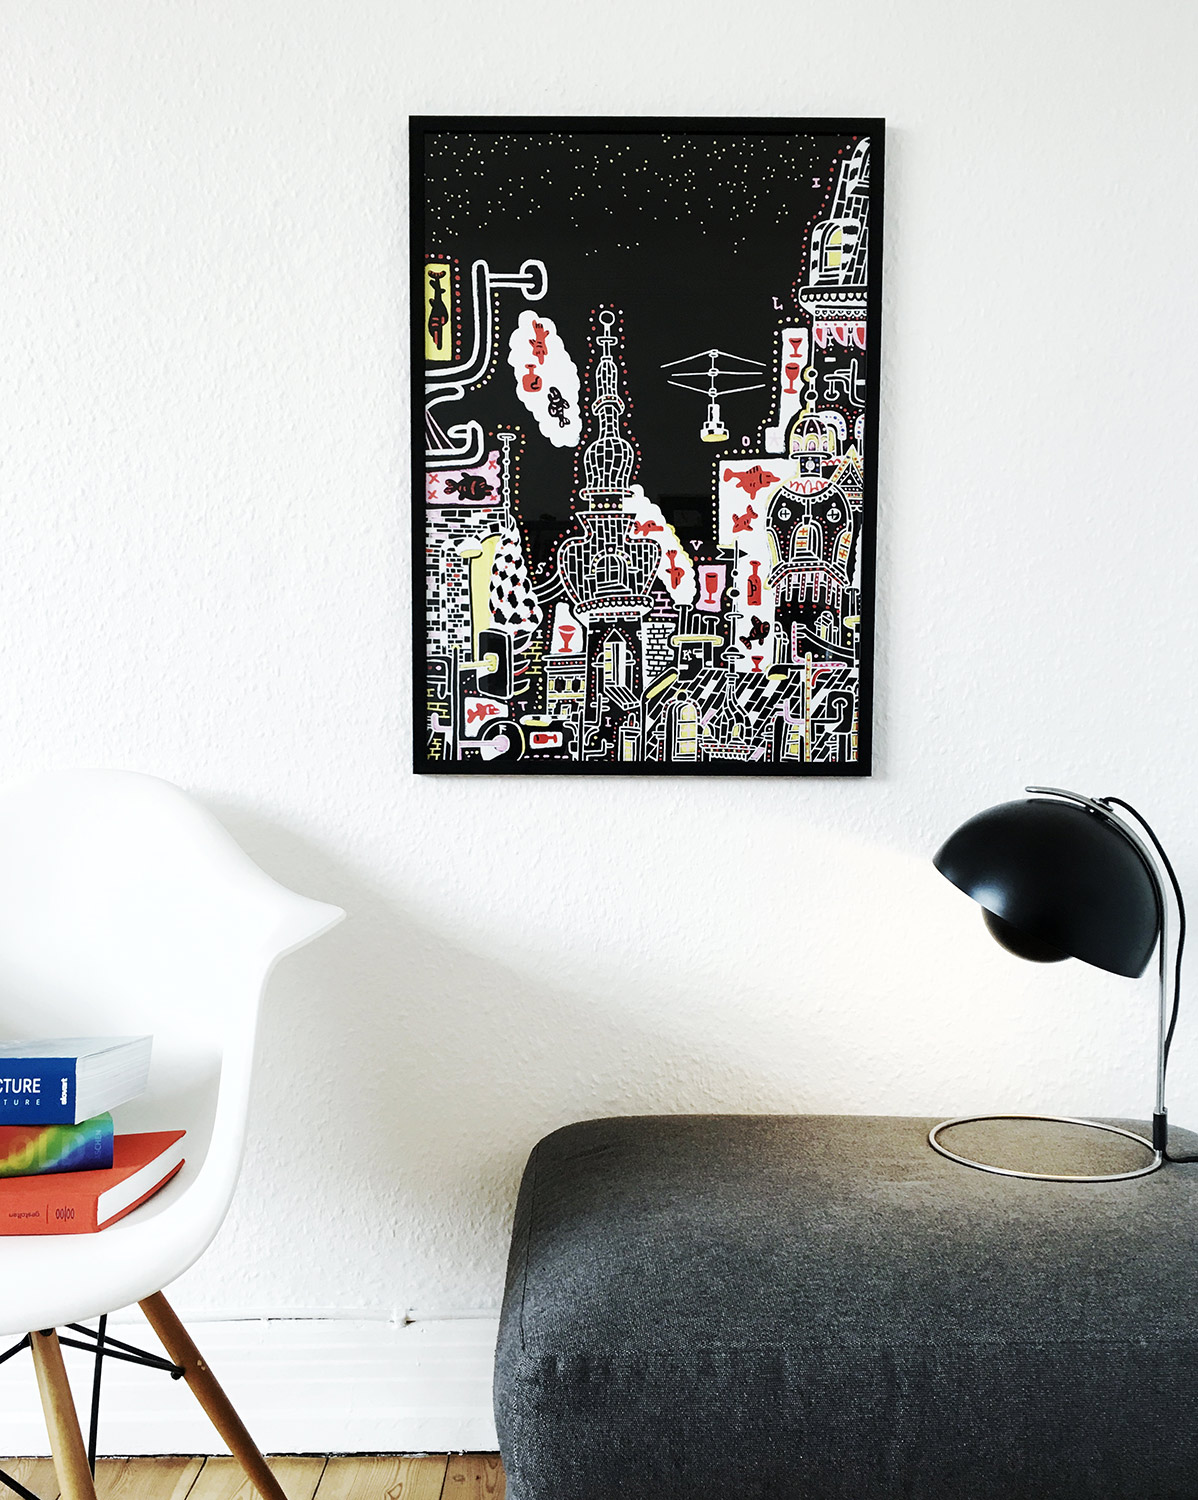 art-prints, giclee, animal, colorful, geometric, pop, architecture, patterns, pets, sky, black, red, white, yellow, ink, paper, architectural, atmosphere, buildings, copenhagen, danish, decorative, design, interior, interior-design, nordic, scandinavien, street-art, vivid, Buy original high quality art. Paintings, drawings, limited edition prints & posters by talented artists.